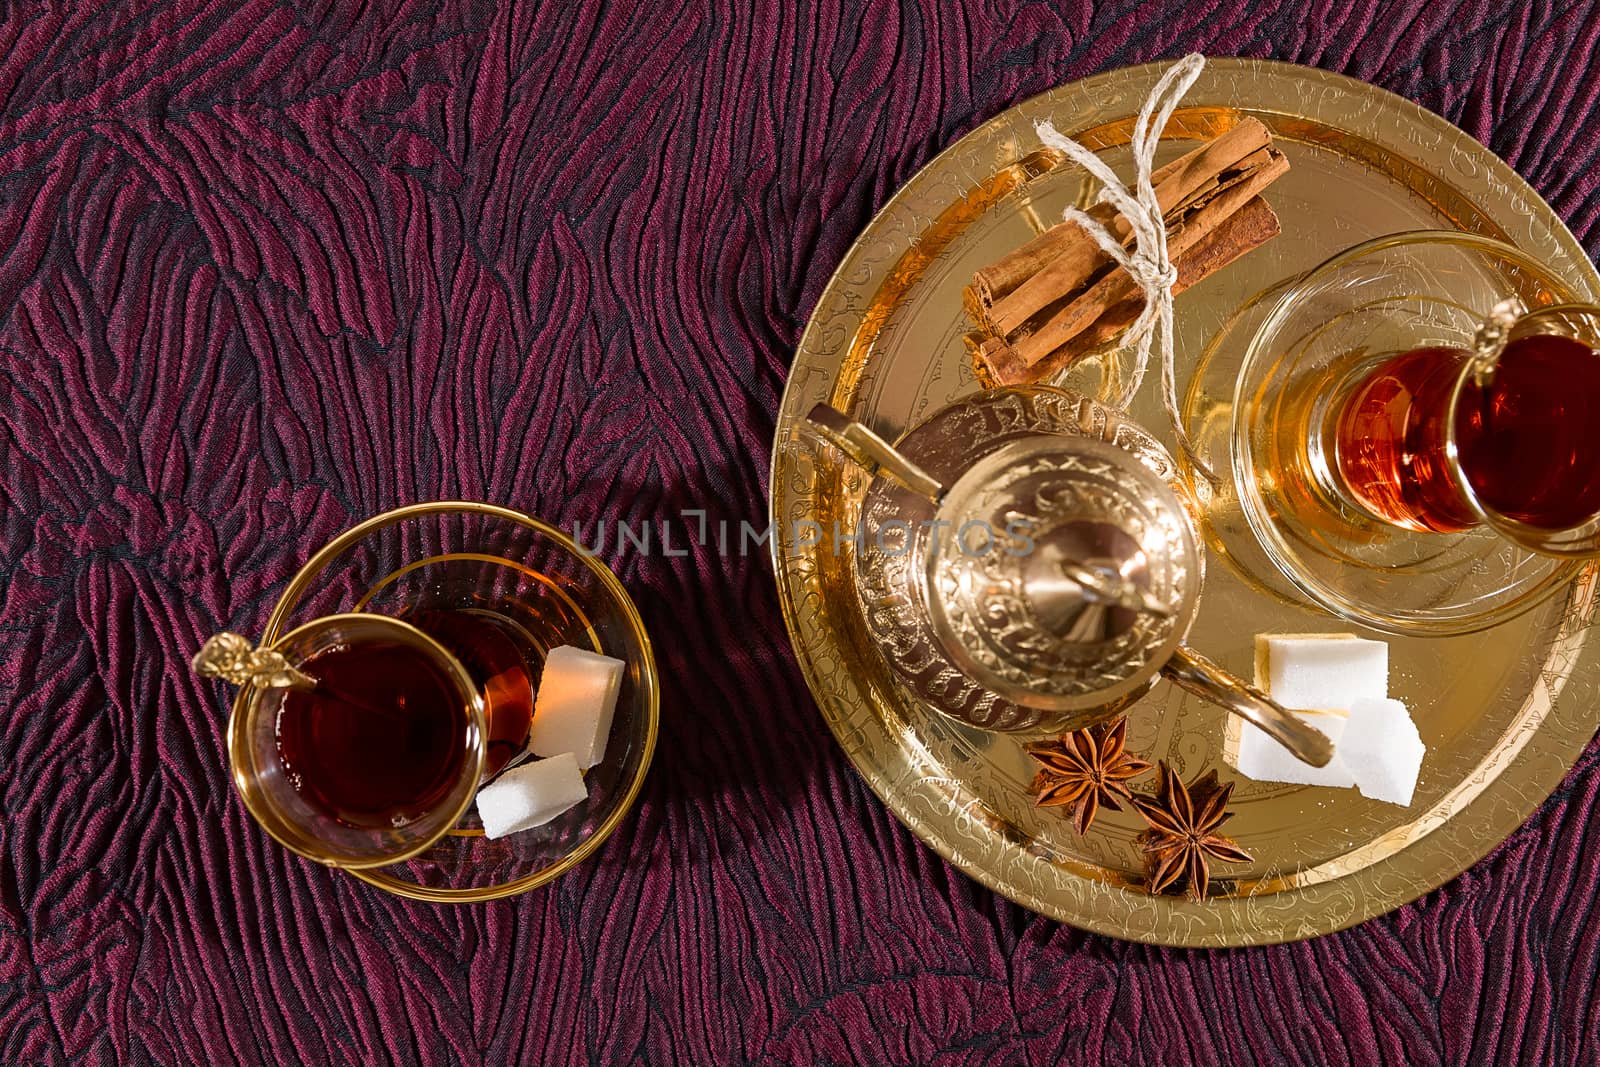 Turkish tea in traditional glass and tray seen from above